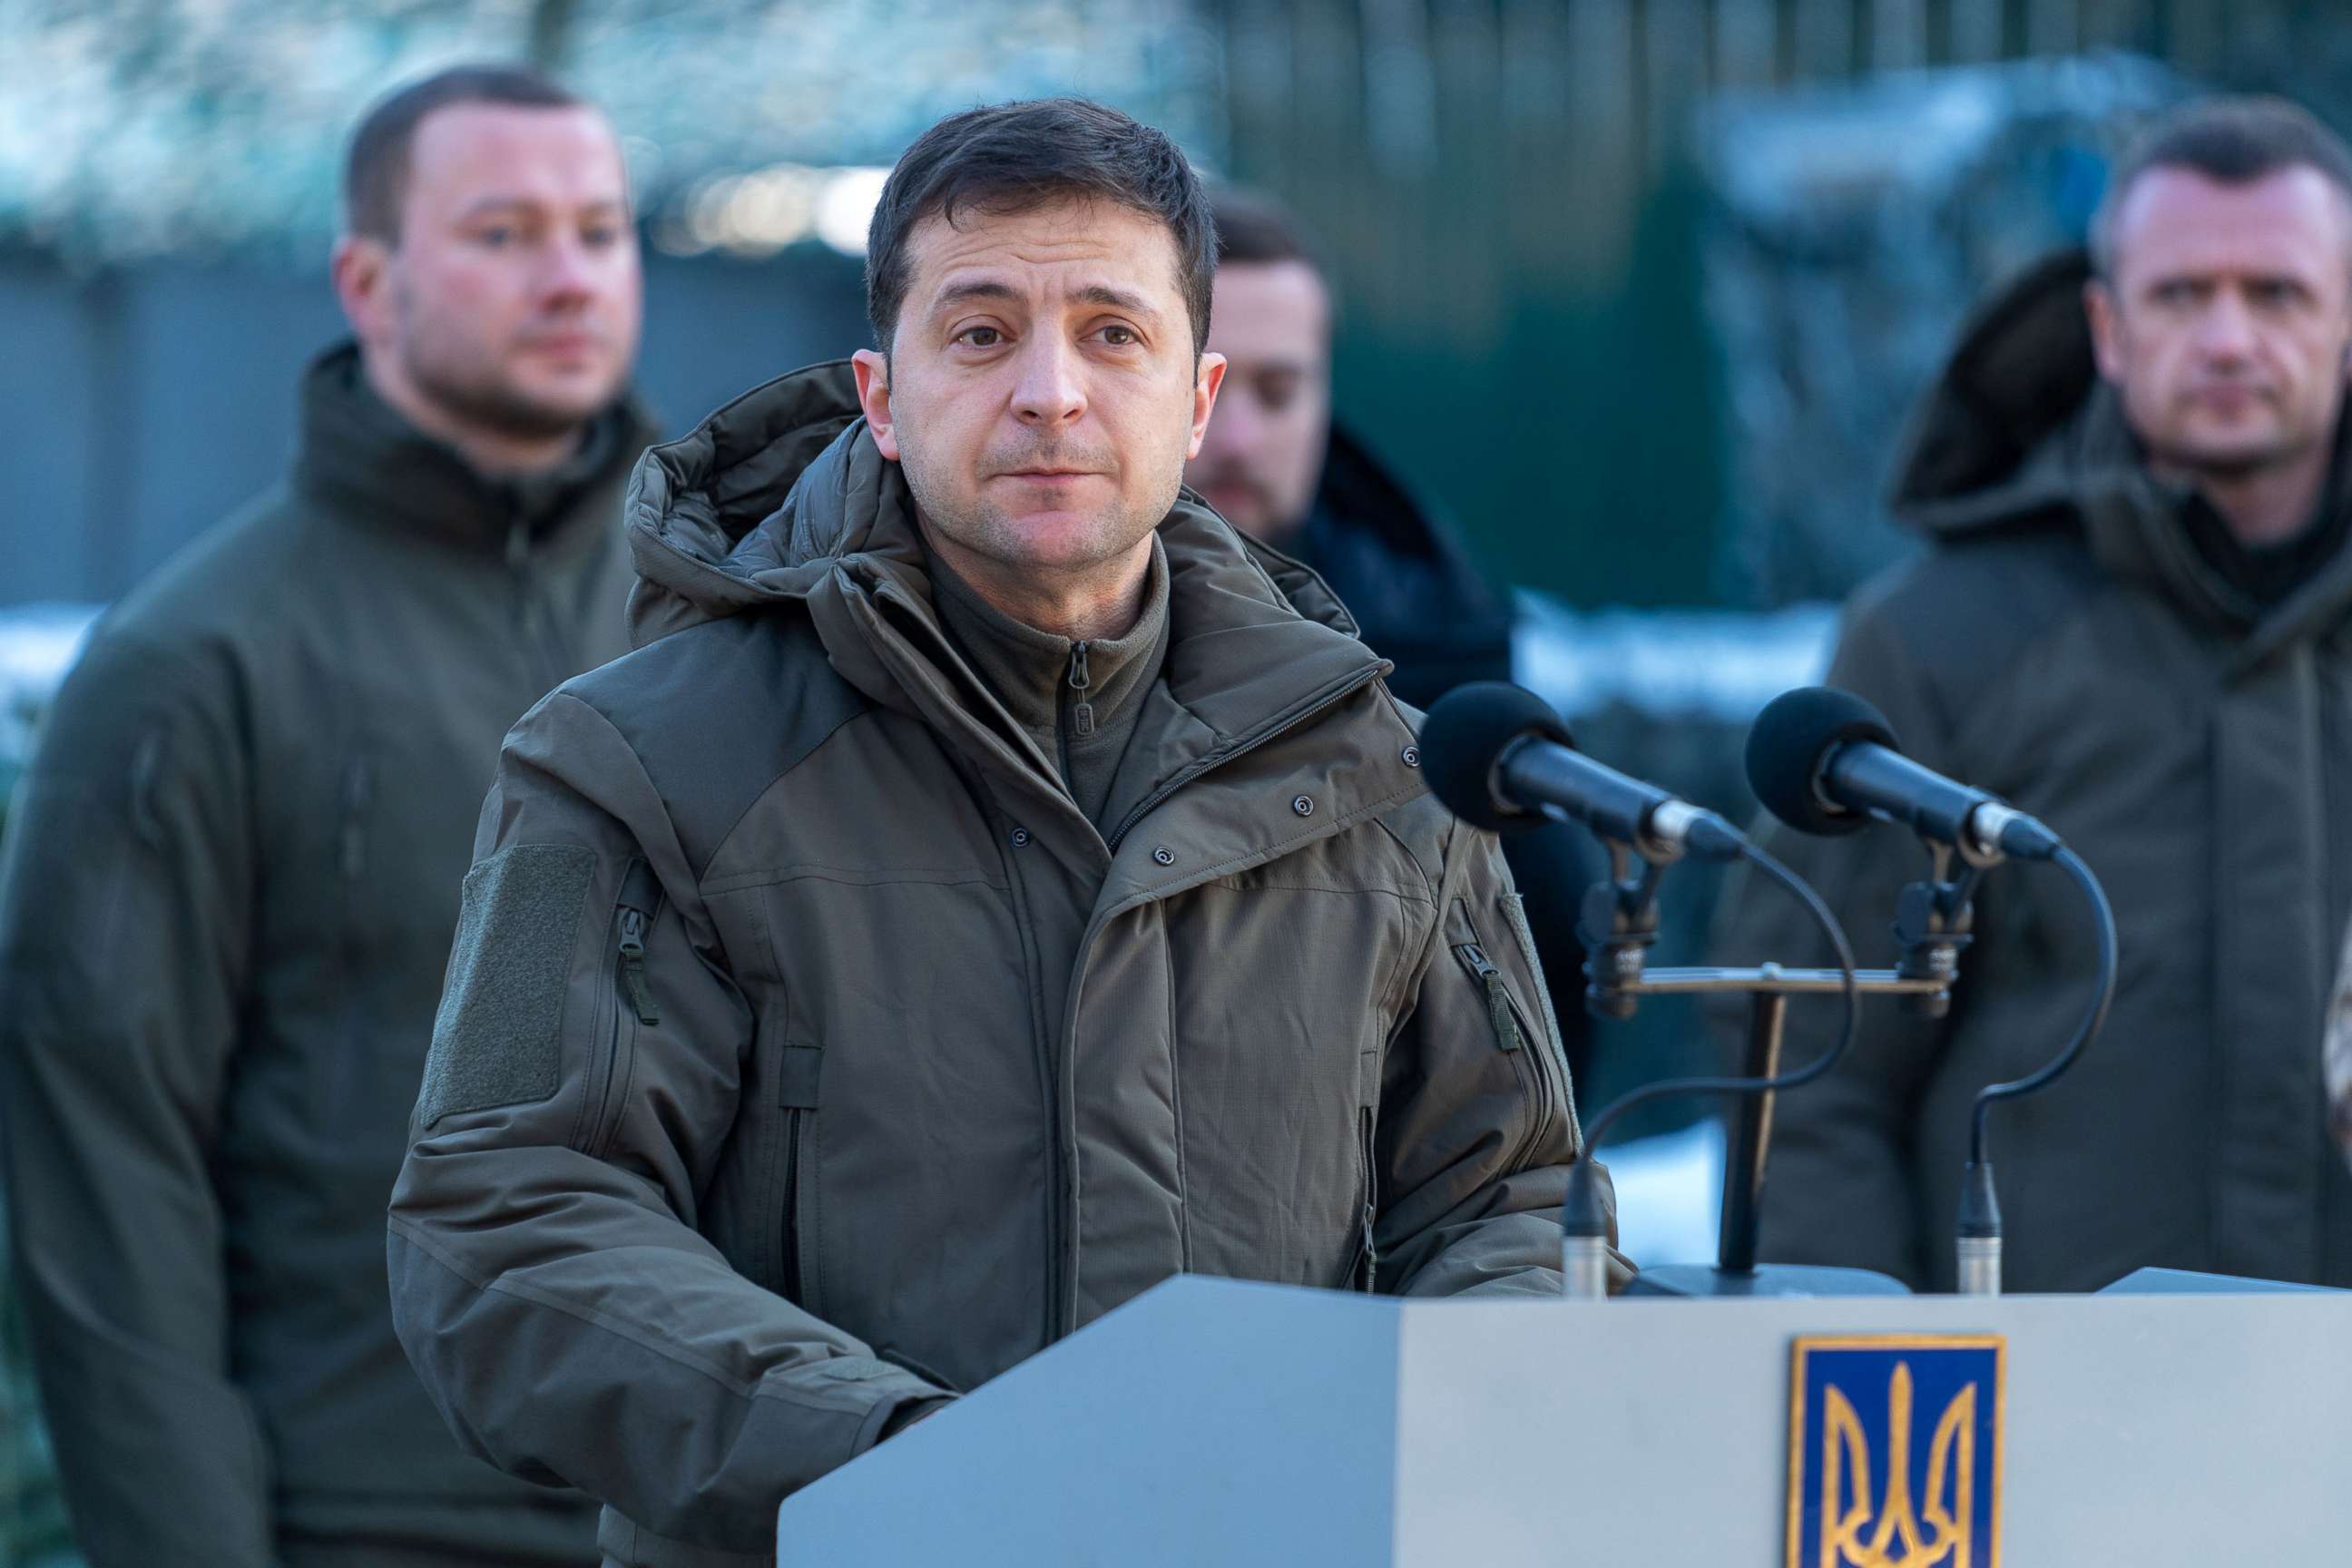 PHOTO: Ukrainian President Volodymyr Zelenskiy delivers a speech during a ceremony marking the Day of the Armed Forces in Donetsk region, Ukraine, on Dec. 6, 2019.